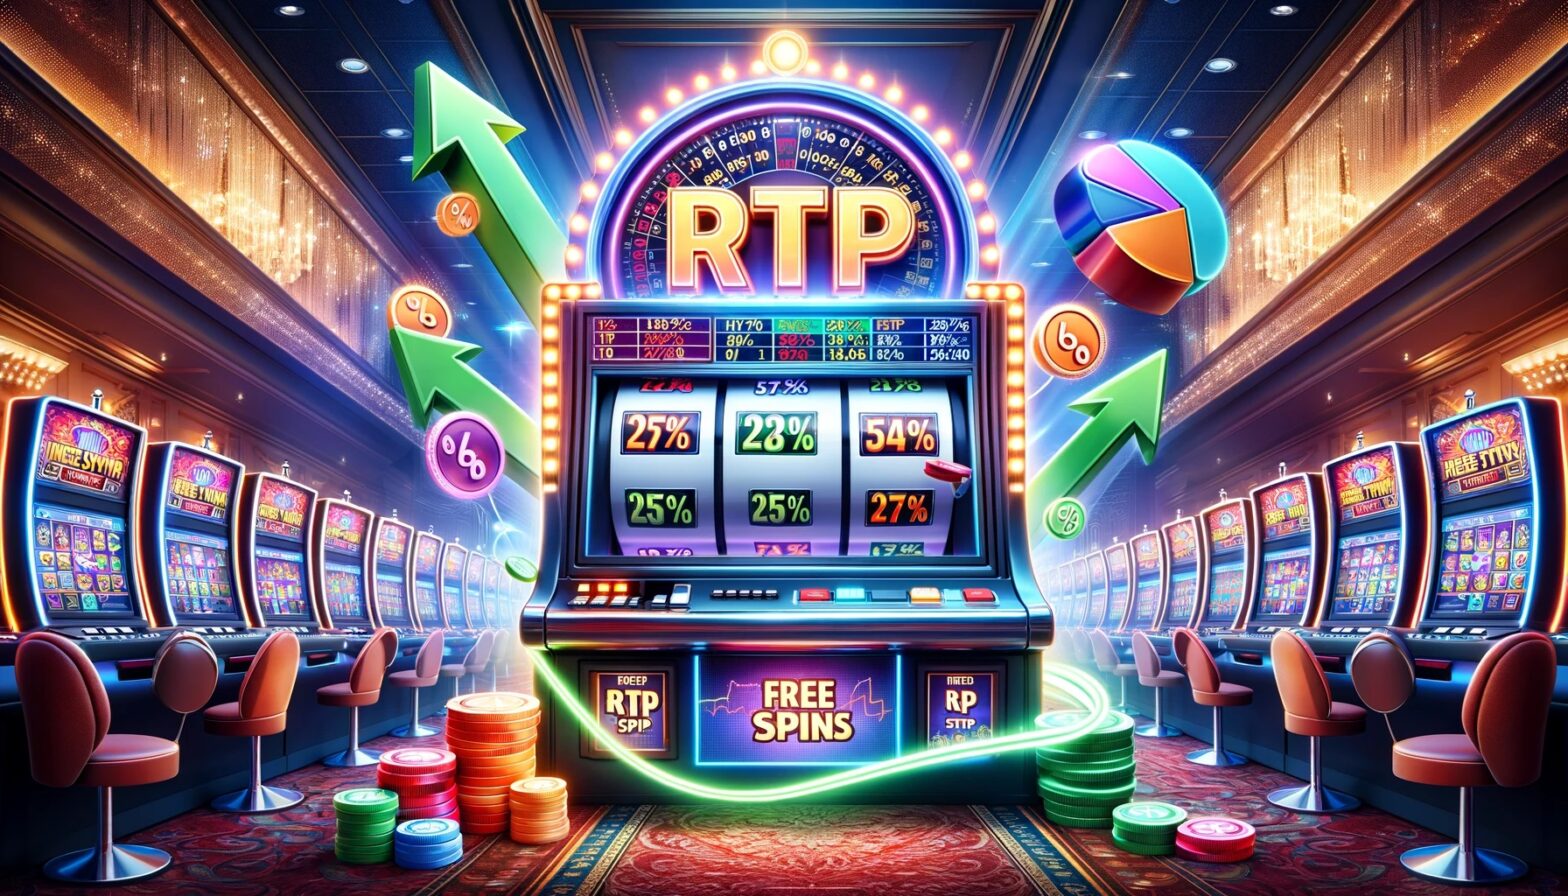 Why RTP is an important factor when playing with free spins